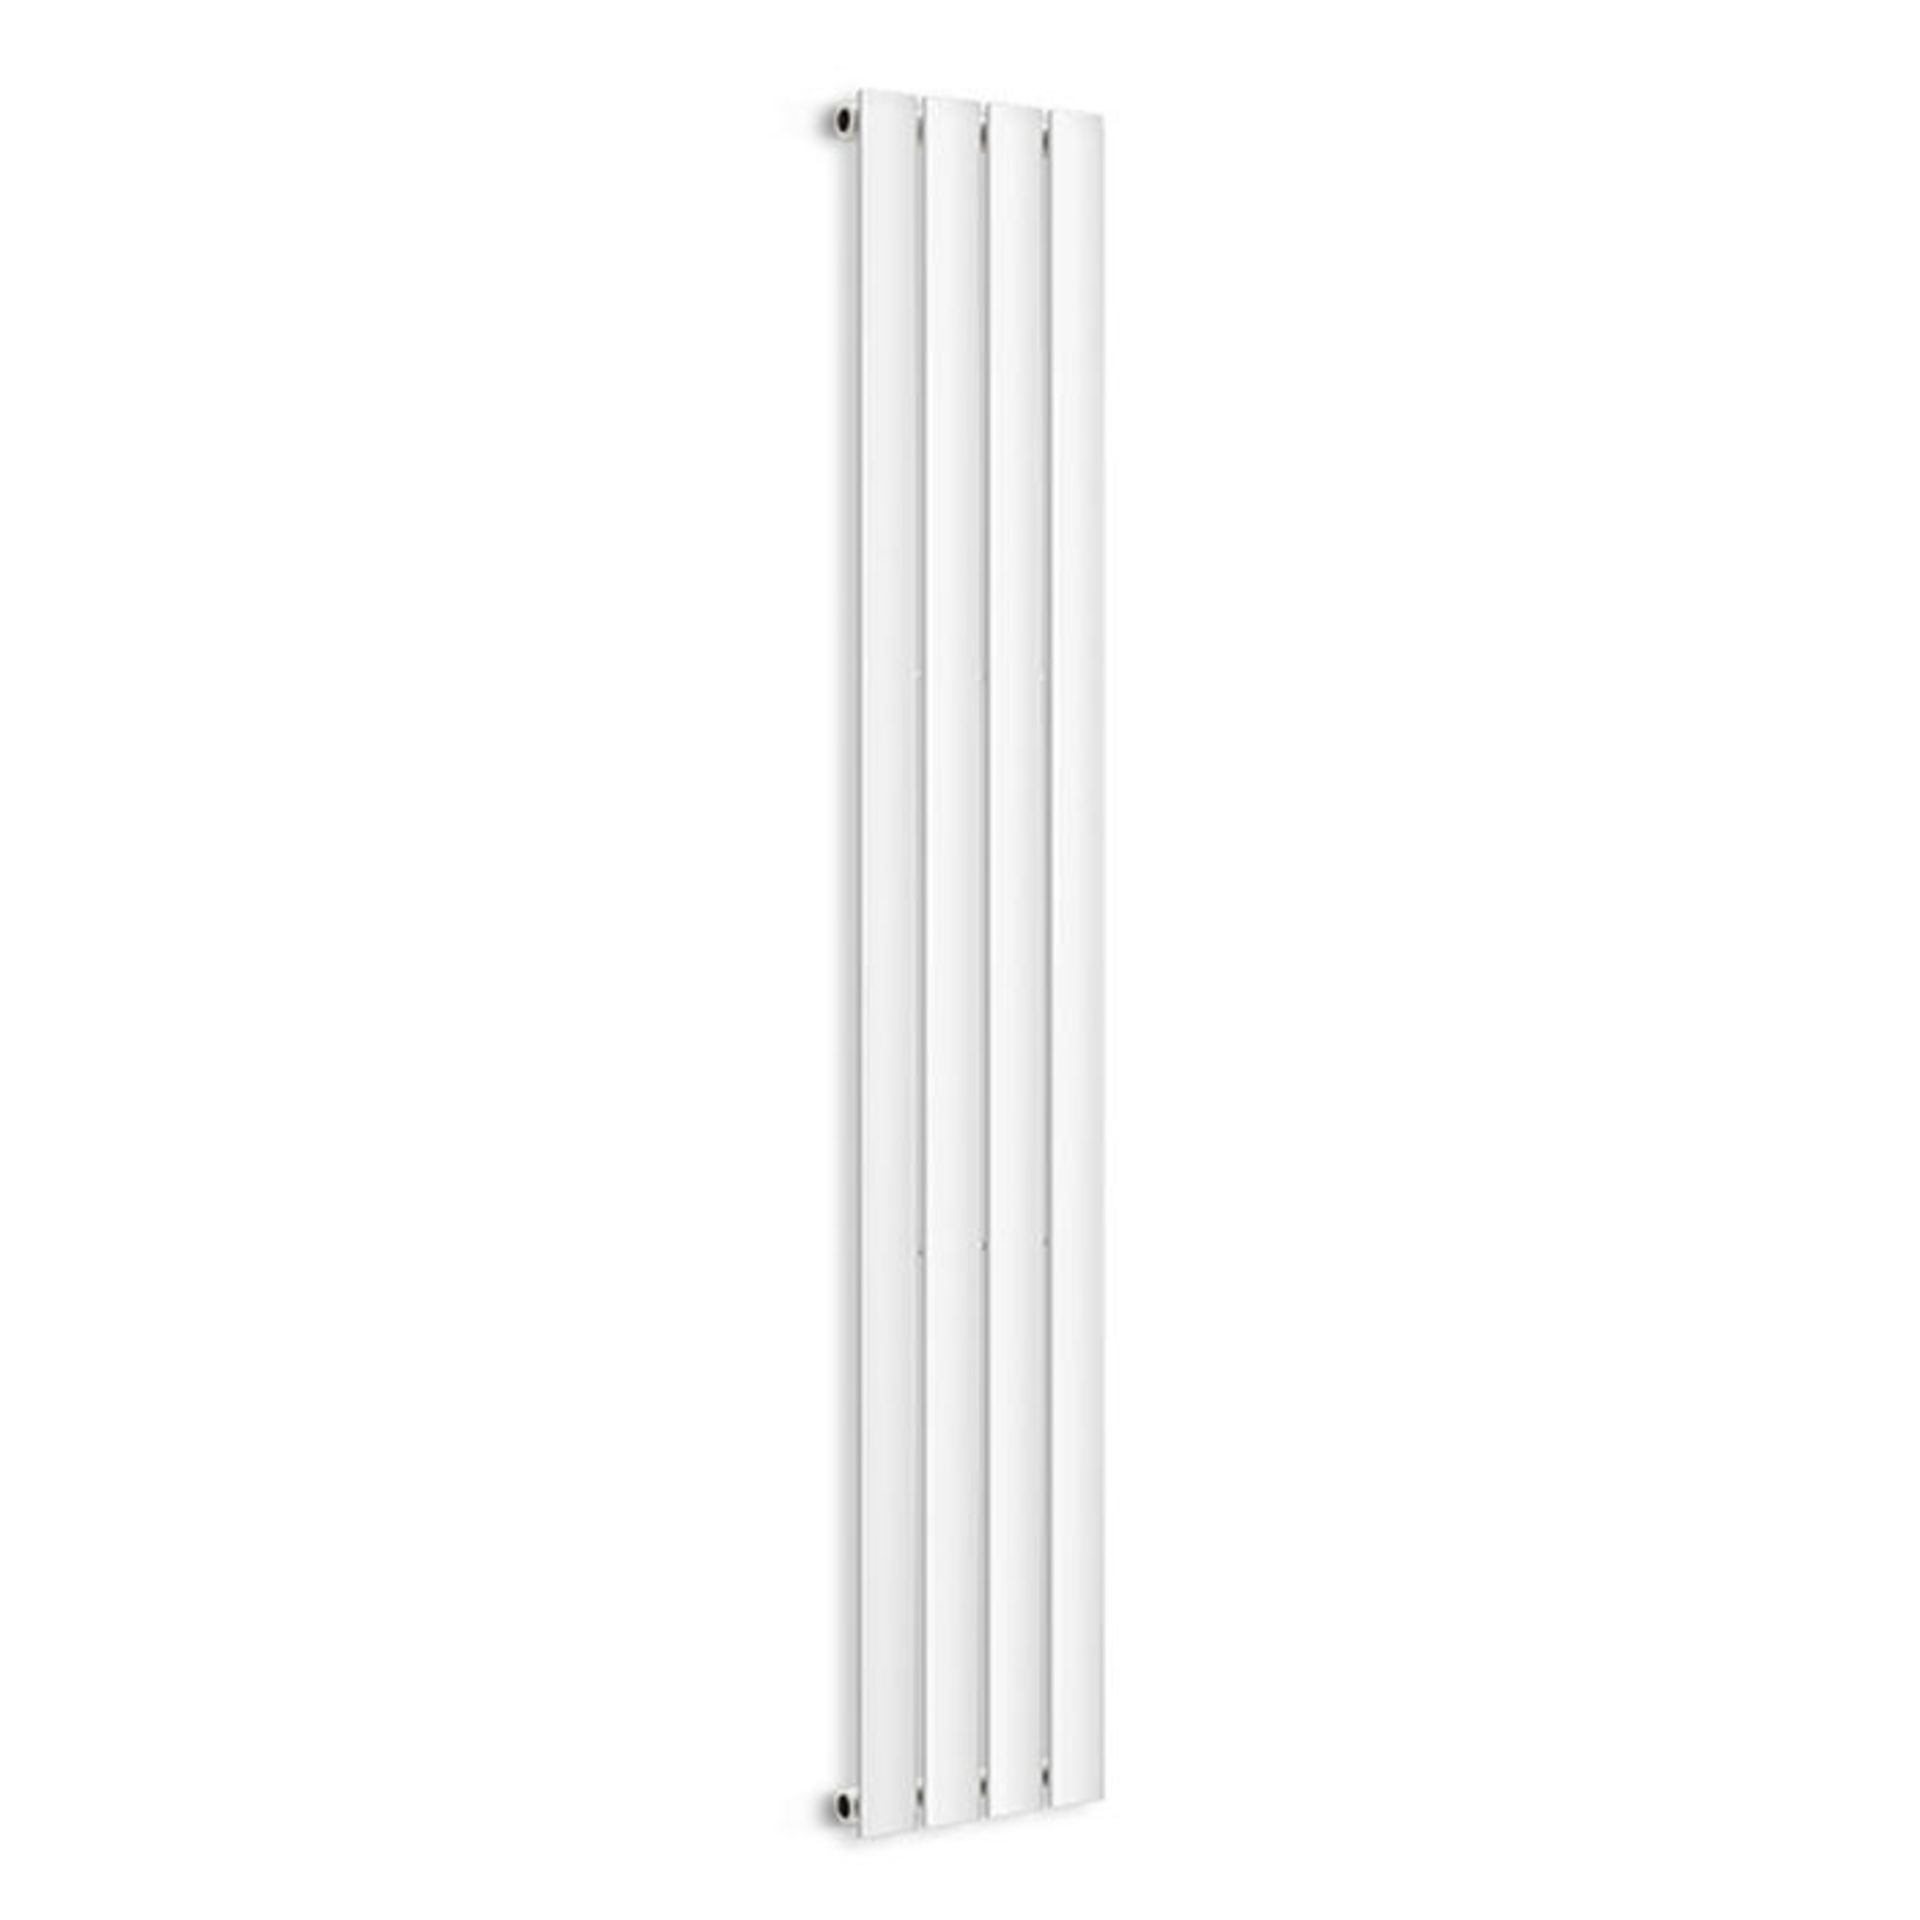 (QW124) 1800x300mm White Panel Vertical Radiator. RRP £219.00. Made from low carbon steel with a